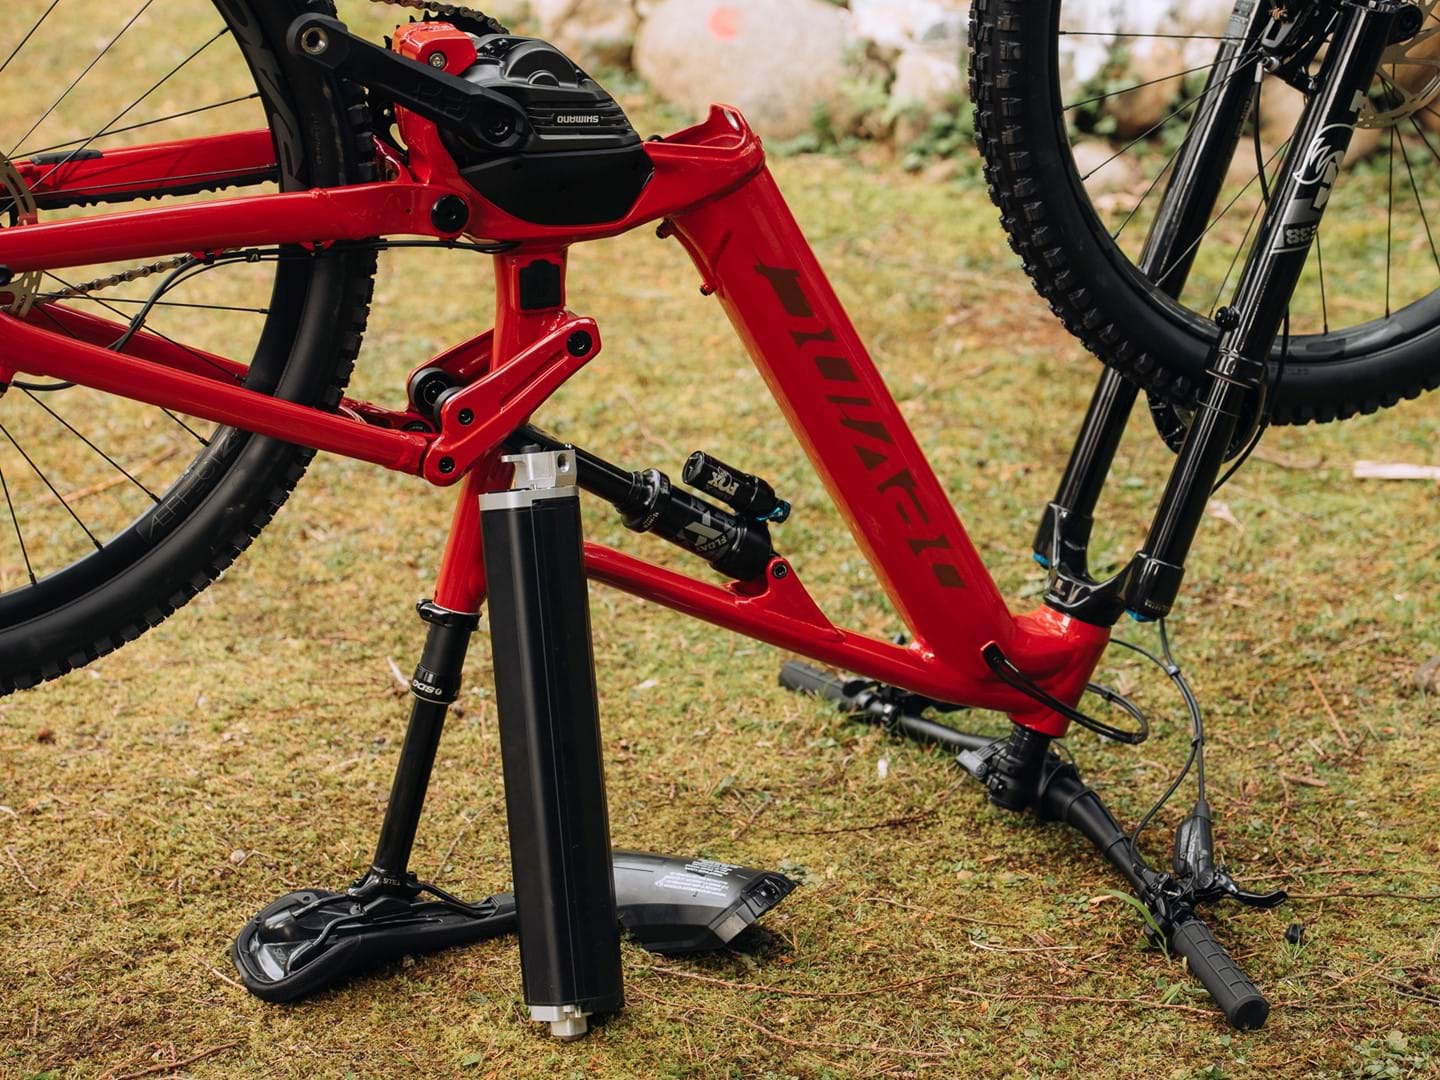 A Devinci E-Troy with its 725Wh battery pack